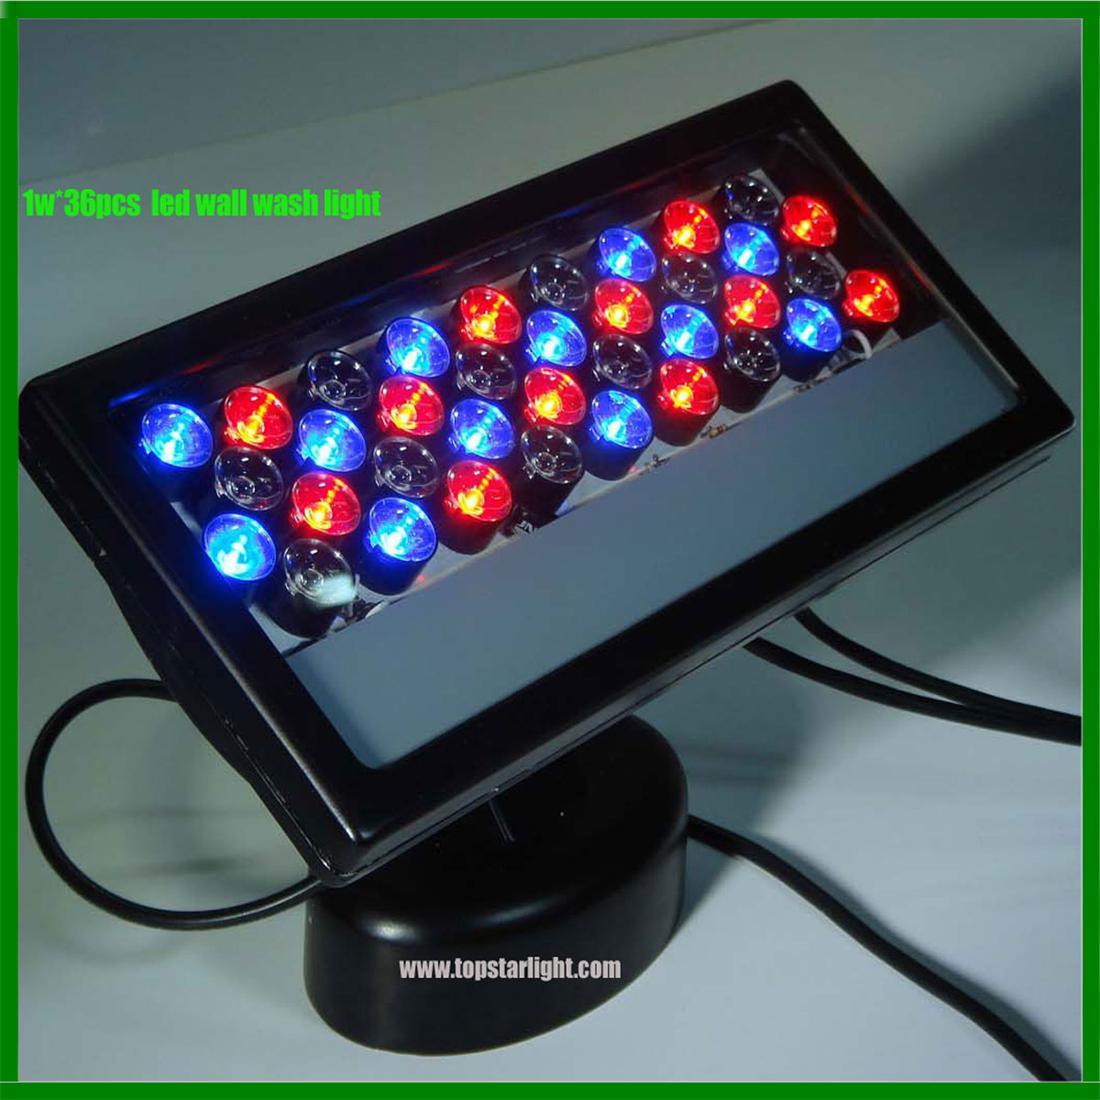 New LED Outdoor Light 36*1W RGB Wall Washer Light